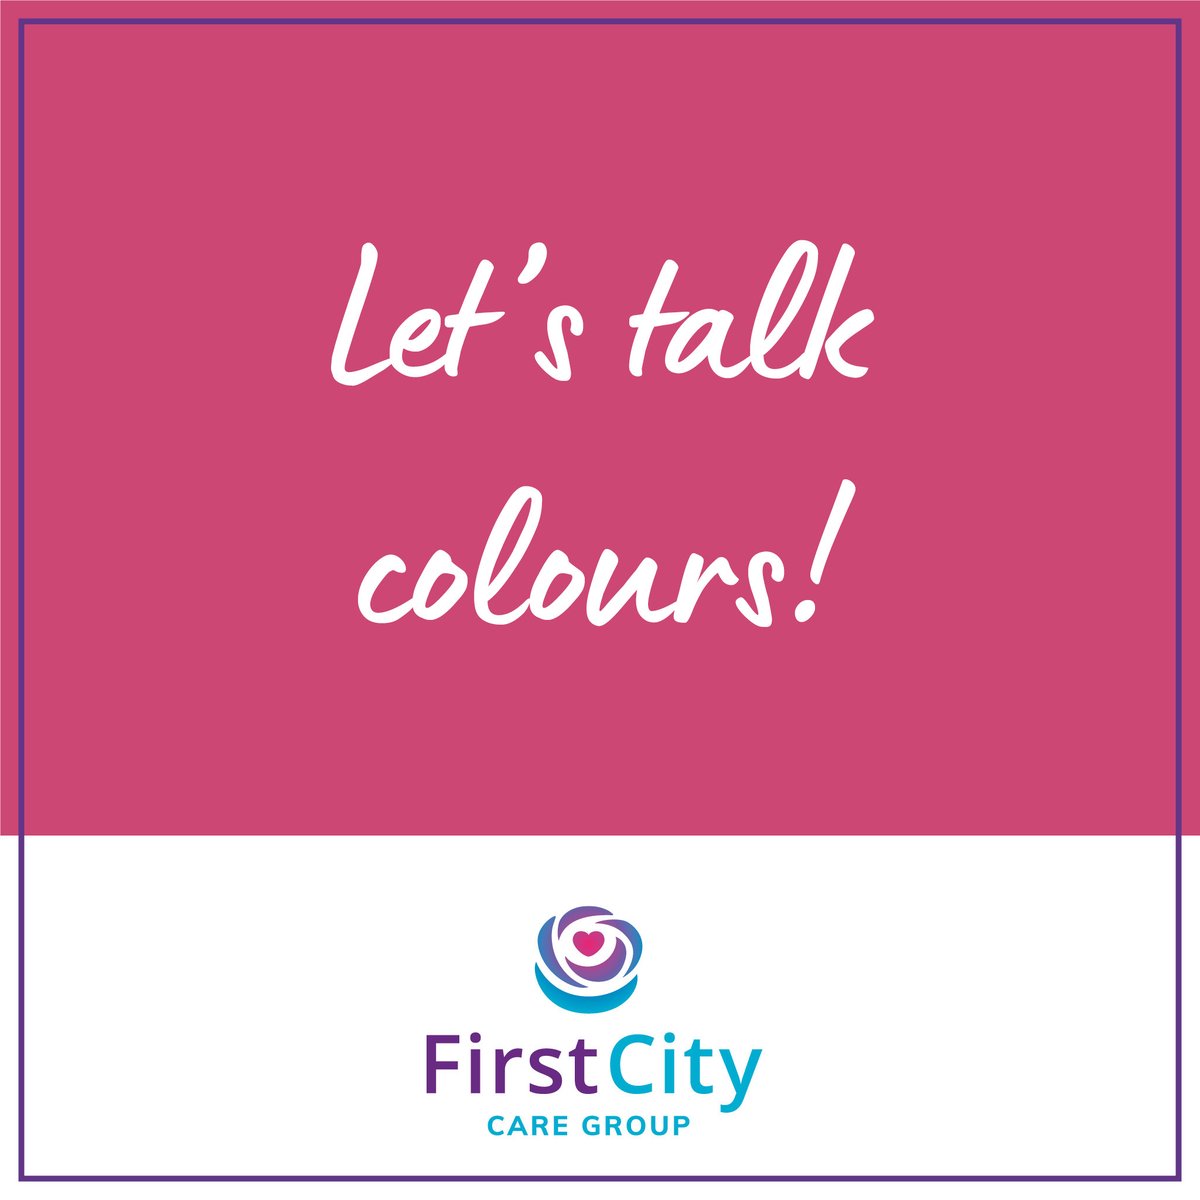 Share your favourite colour with us in the comments below...

#TuesdayThoughts #TuesdayTopic #Gettoknowyourcolleagues #gettoknowme #Shareyourthoughts